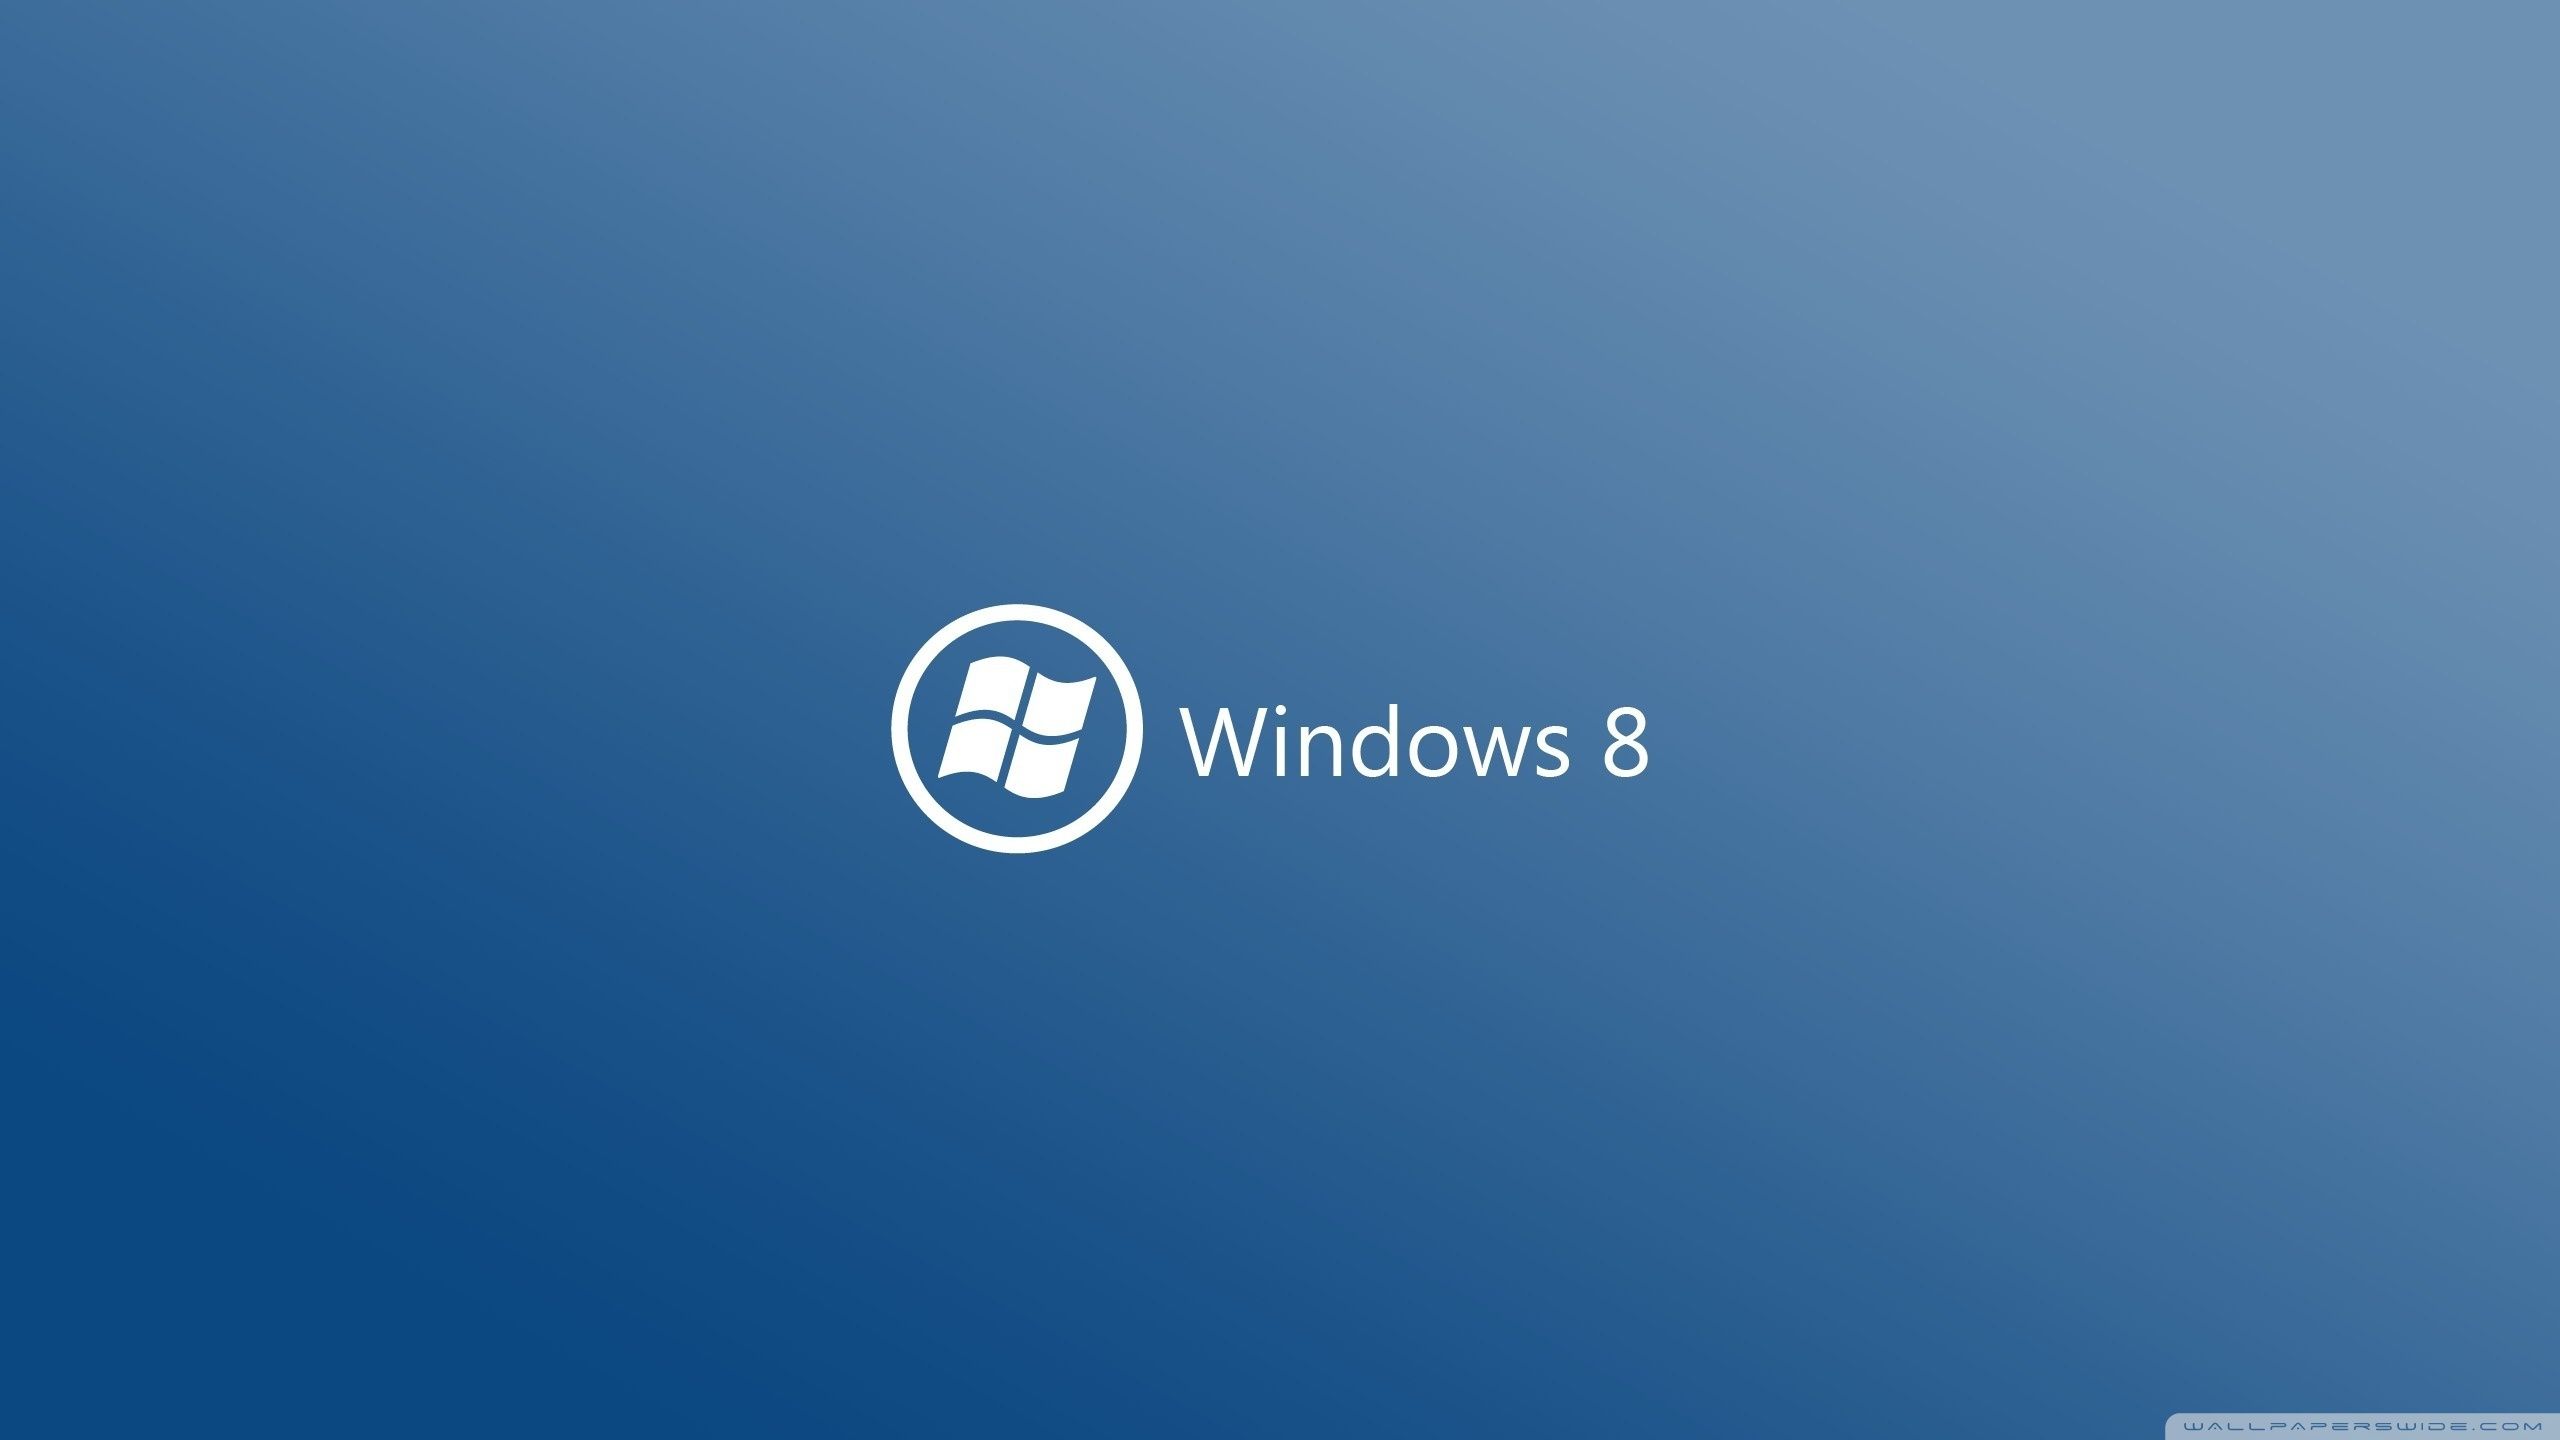 Windows 8 blue minmal theme wallpapers and images - wallpapers